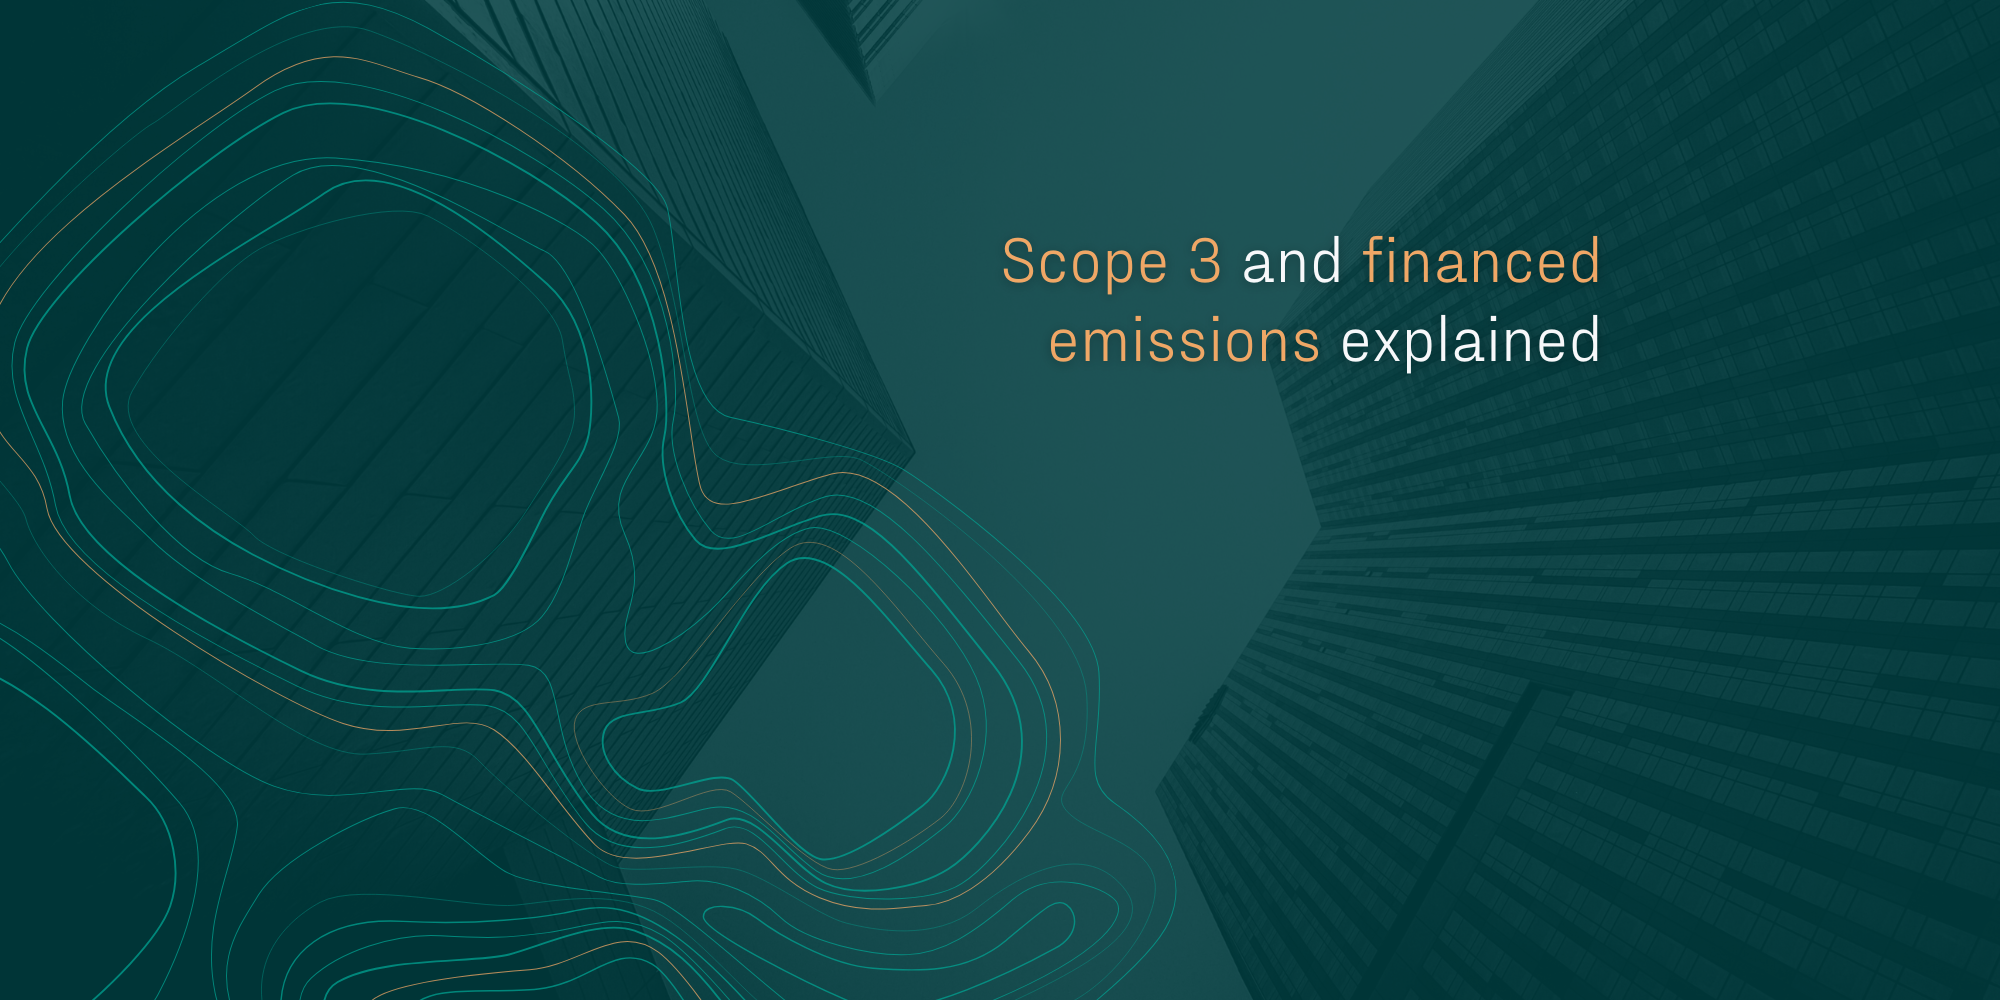 Scope 3 and financed emissions explained featured image